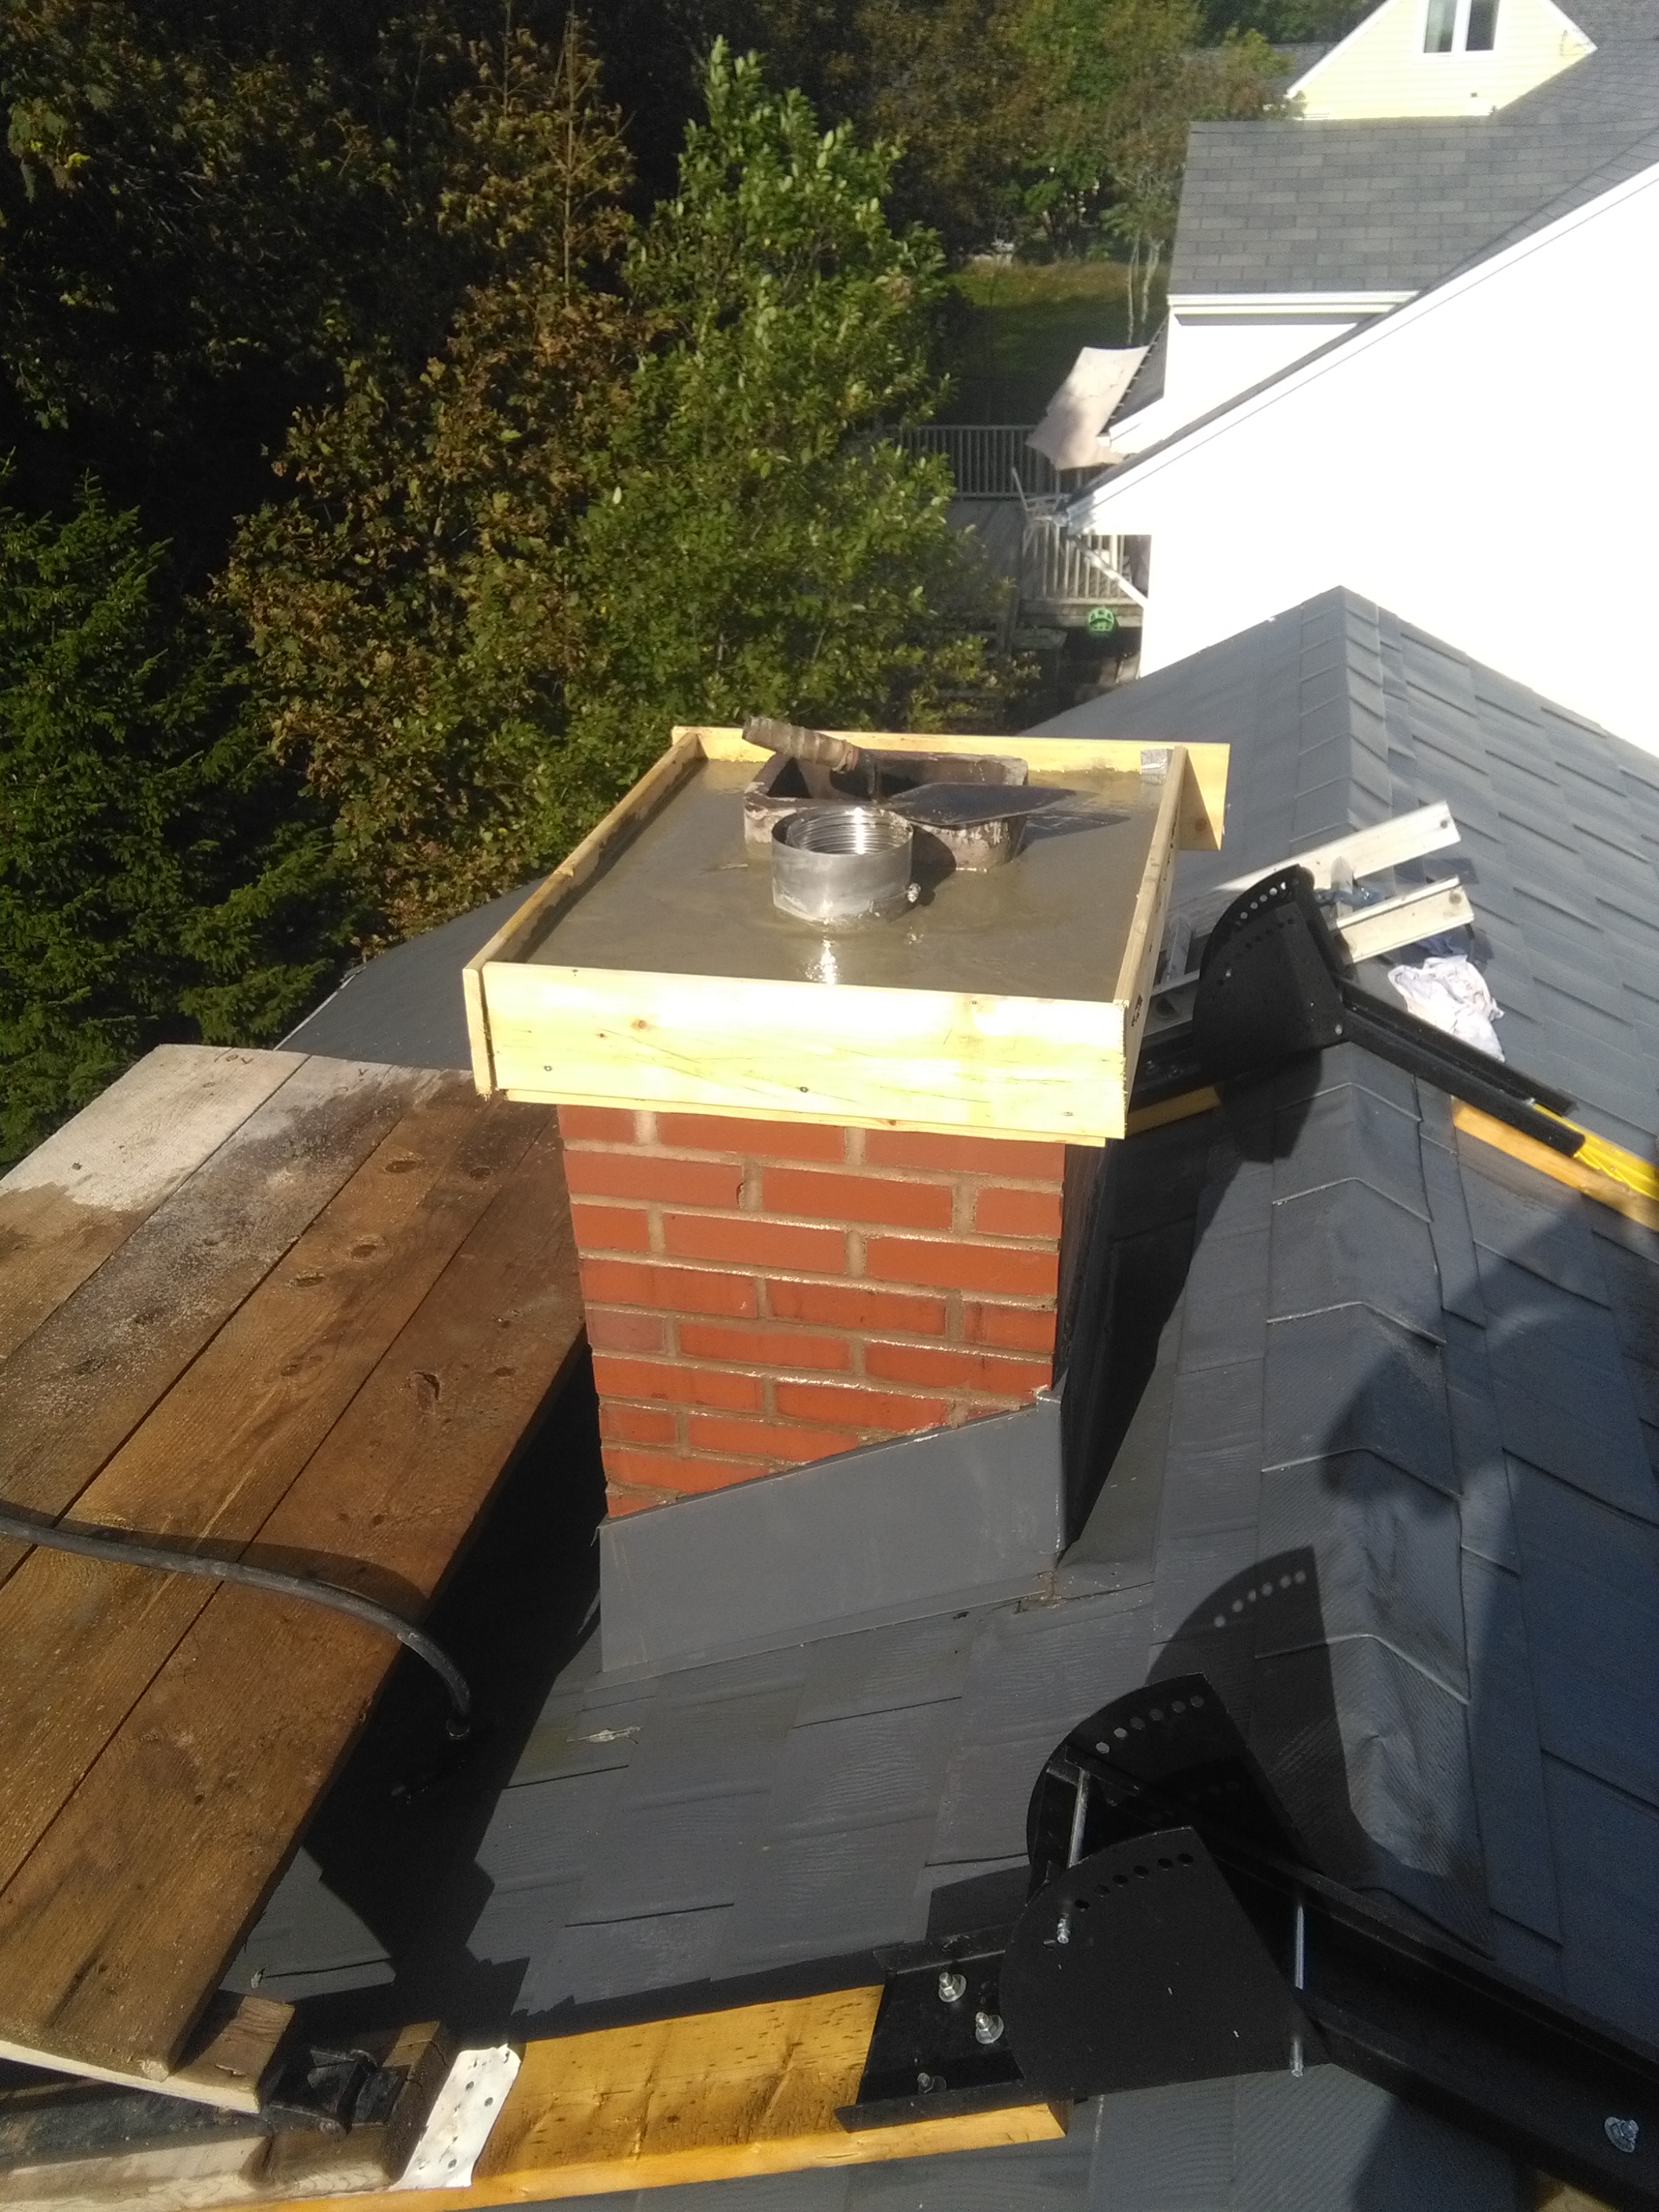 image of chimney construction-rebuild services completed in Halifax-Dartmouth Regional Municipality, NS by Pro Chimney Services based in Halifax, NS servicing all of the Halifax-Dartmouth Regional Municipality, Bedford, Sackville, Mount Uniacke, Windsor, Hantsport , Wolfville, Kentville, Chester, Mahone Bay, Lunenburg, Bridgewater, Liverpool, Fall River, Wellington, Enfield, Elmsdale, Brookfield, Truro, Musquodoboit Harbour & surrounding areas.